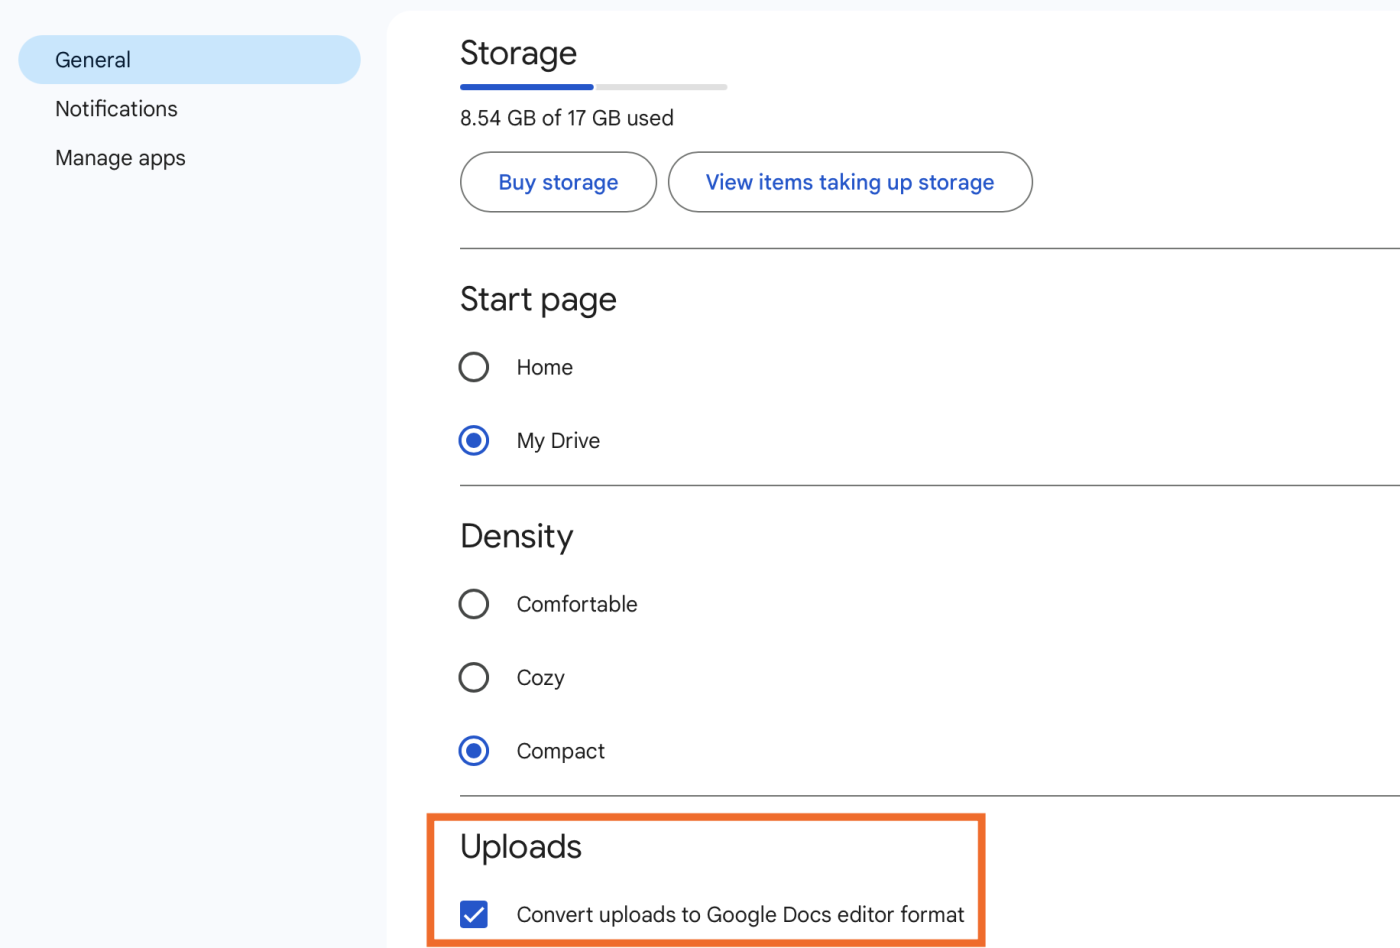 The Uploads checkbox described above to automatically convert uploads to Google Docs